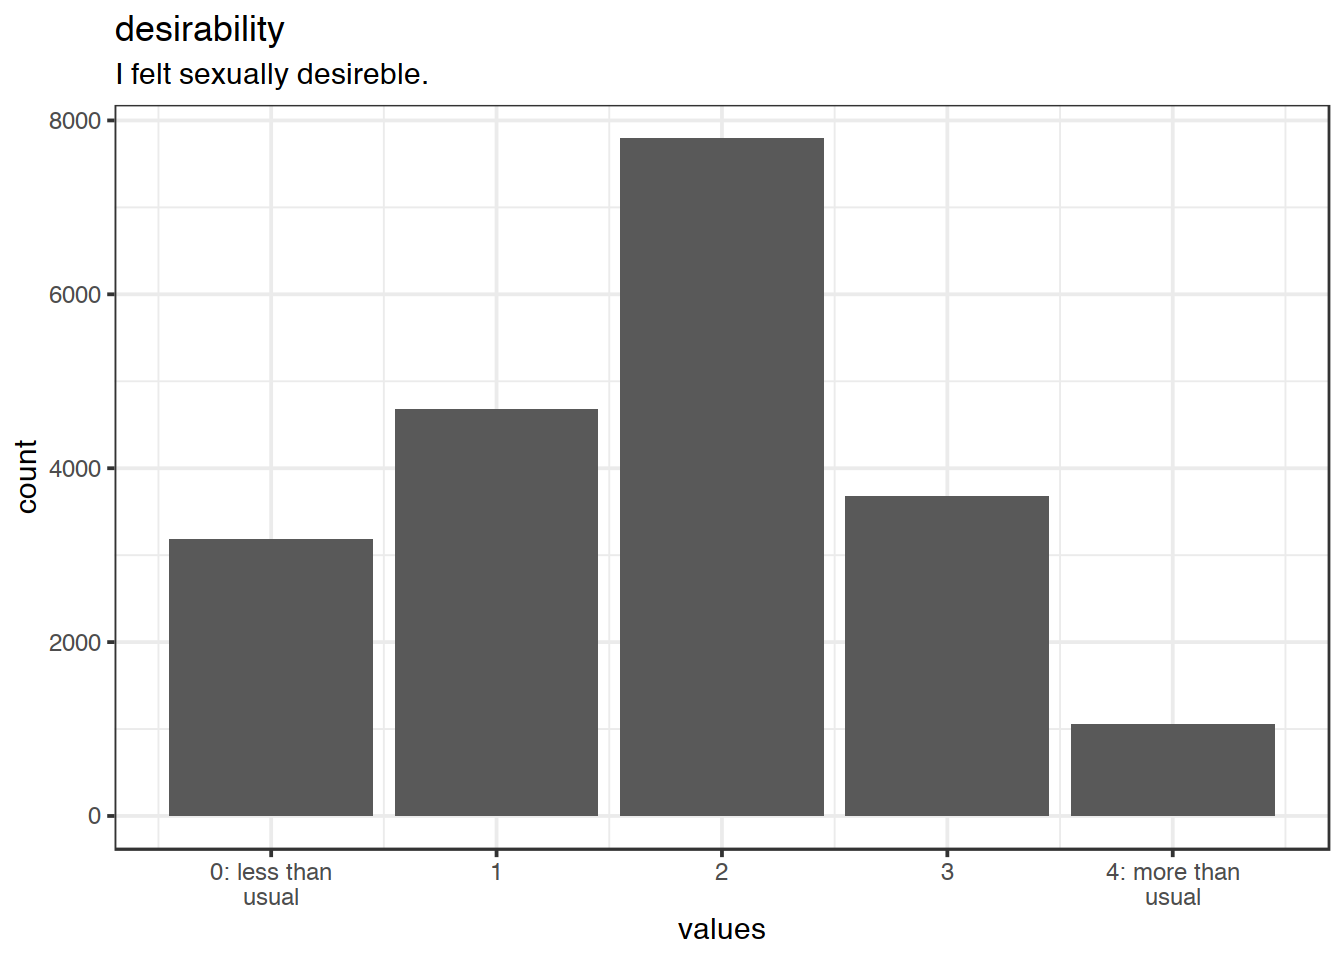 Distribution of values for desirability